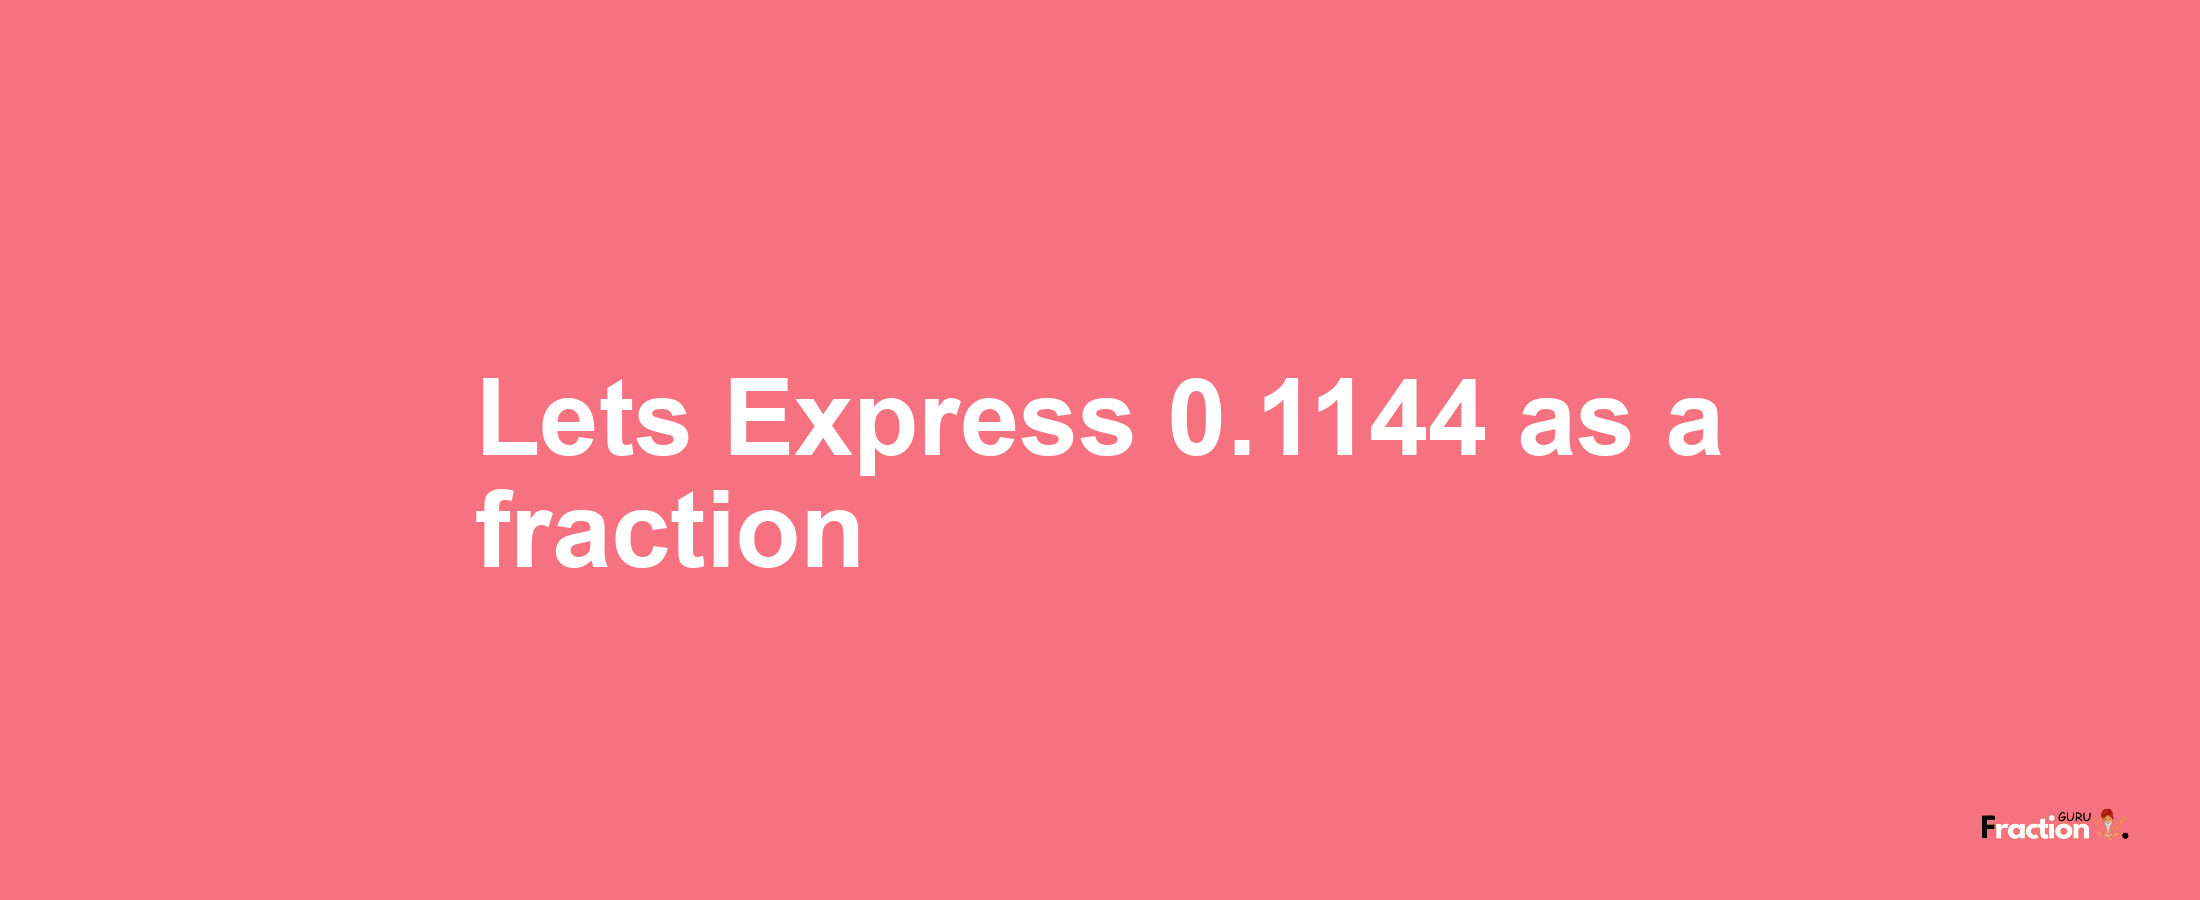 Lets Express 0.1144 as afraction